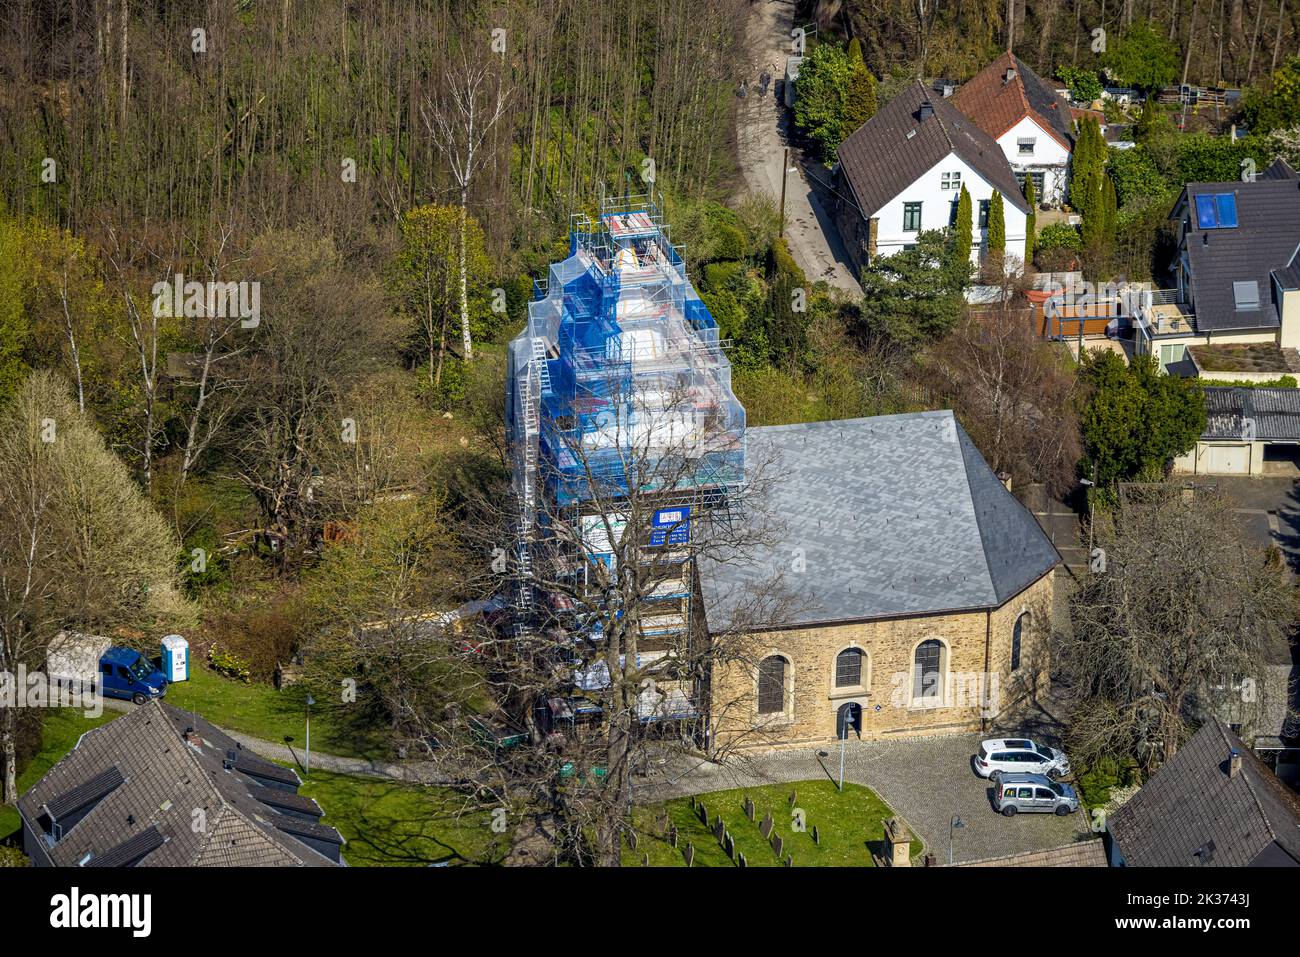 Aerial view, renovation of the steeple of the village church Kirchende, Westende, Herdecke, Ruhr area, North Rhine-Westphalia, Germany, Worship site, Stock Photo